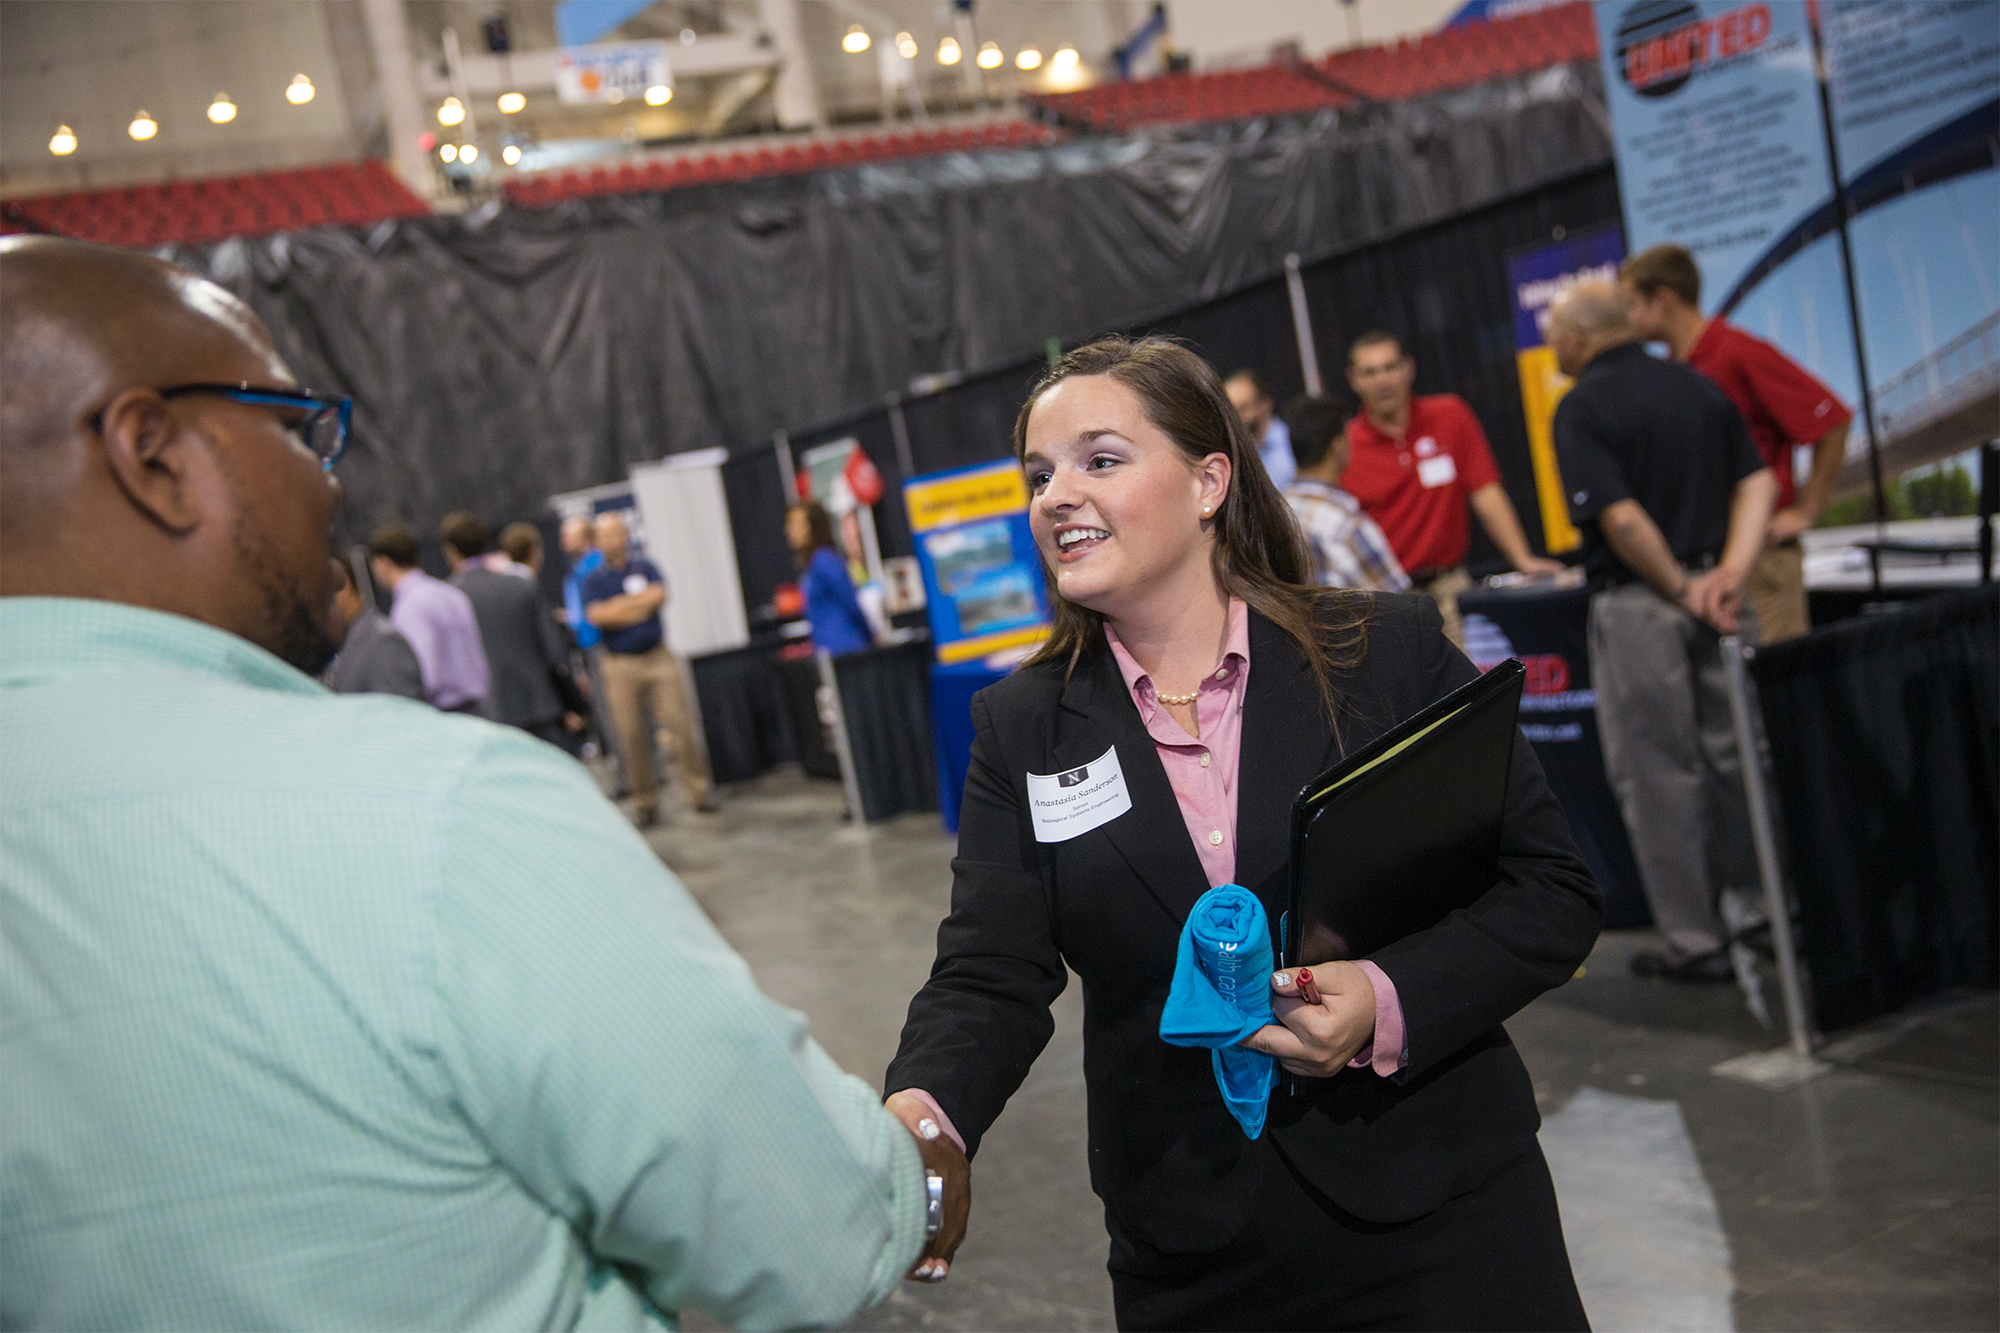 Encourage your student to connect with employers at upcoming networking events.